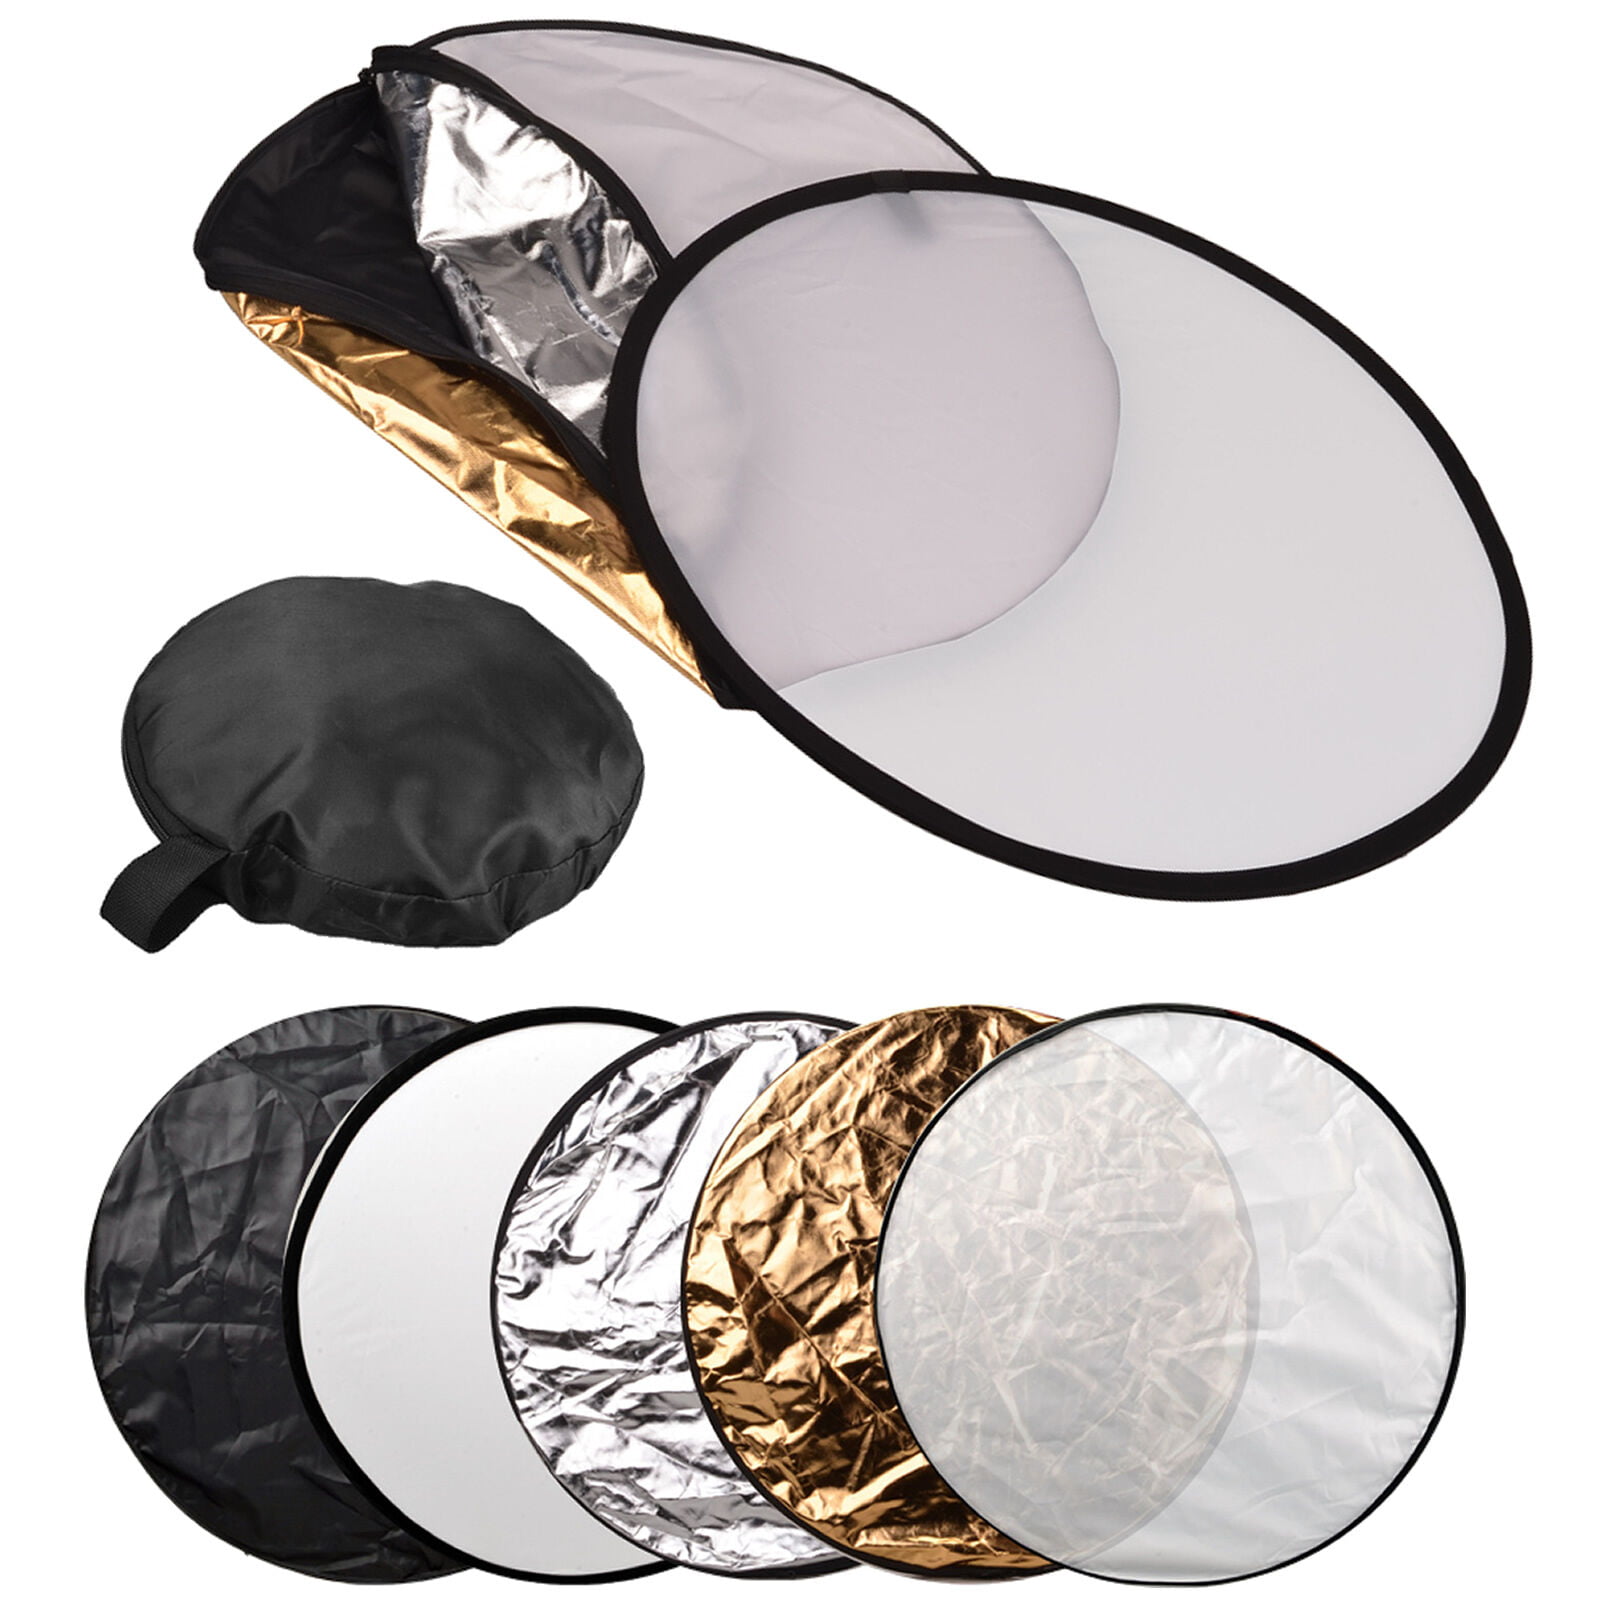 Teerwere Round Light Reflector Diffuser Kit Portable 5 in 1 80cm Collapsible Round Multi Disc Light Reflector for Studio Collapsible Multi-Disc Light Reflector Color : Multi-Colored, Size : 80cm